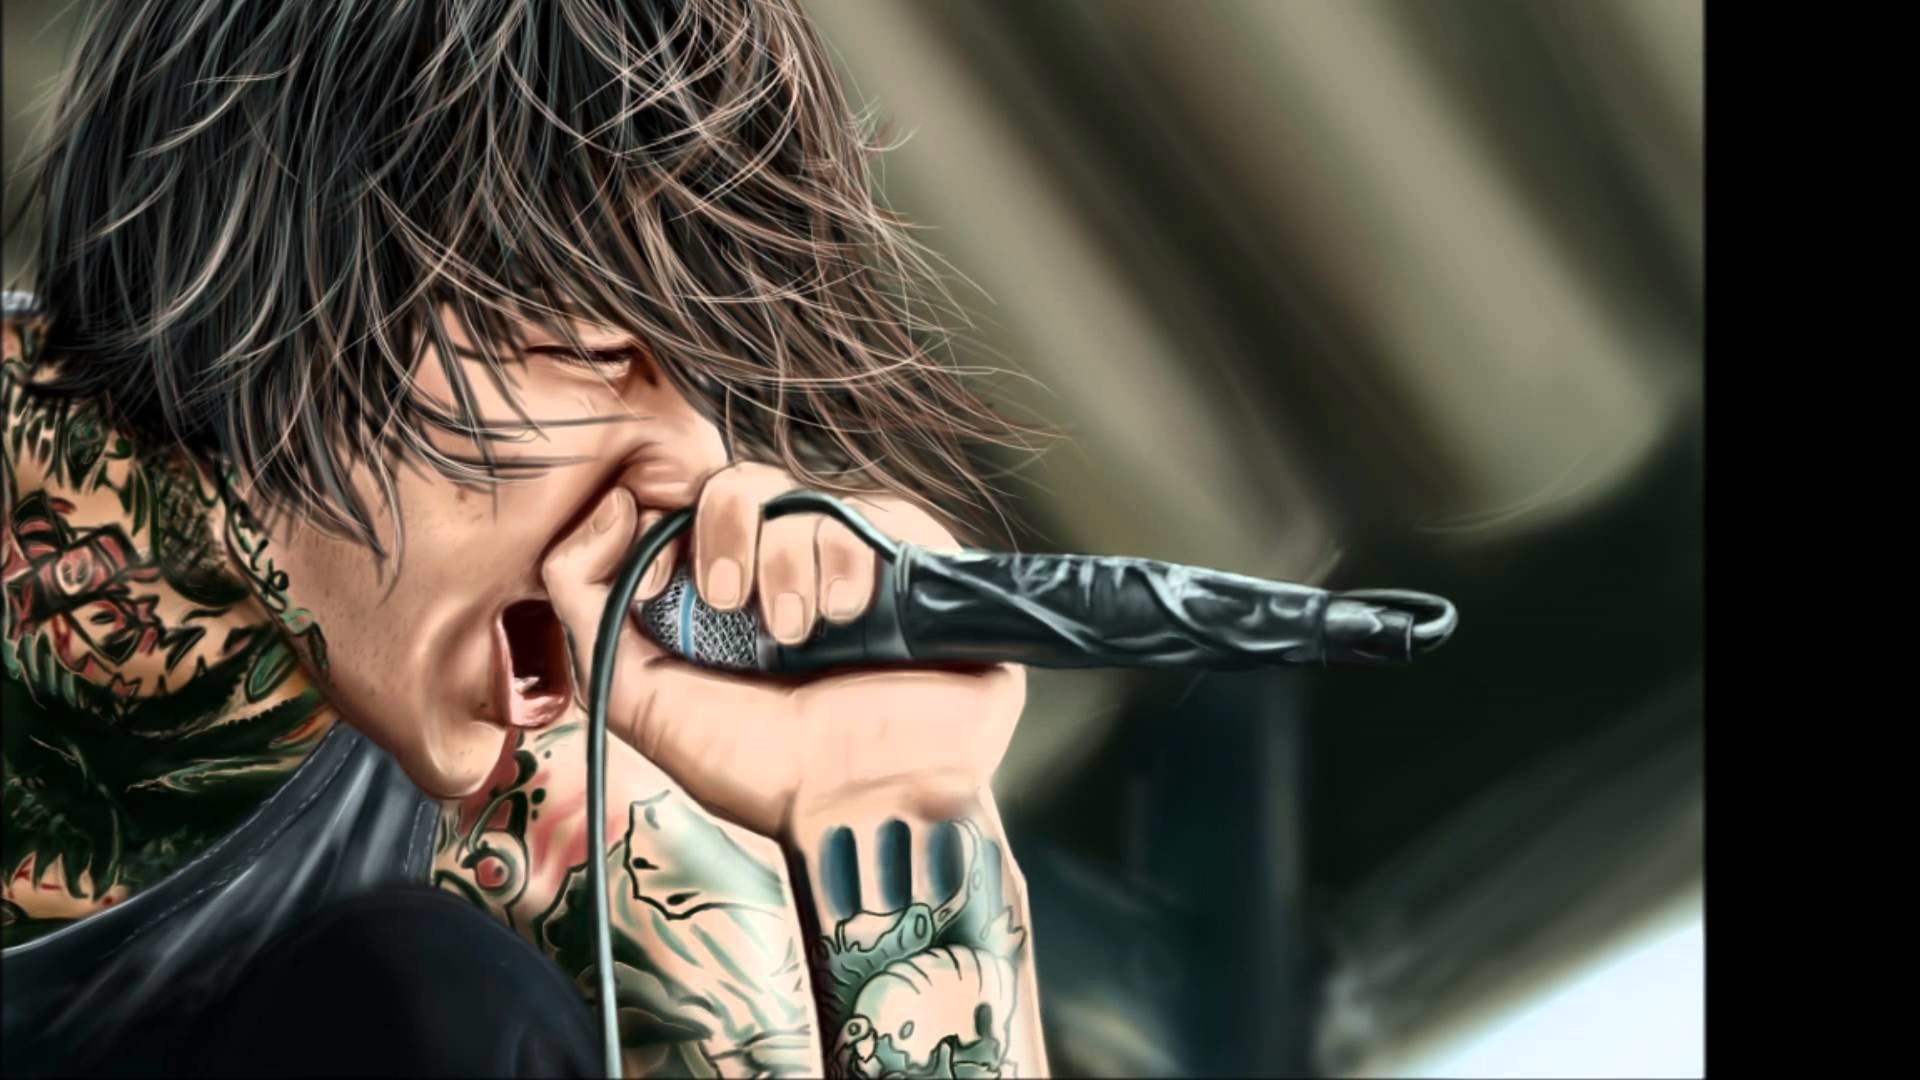 1920x1080 P Mitch - - - This is dedicated to my wonderful friend ! Mitch Lucker from  the band Suicide Silence. Suicide Silence - You only live once [link] .